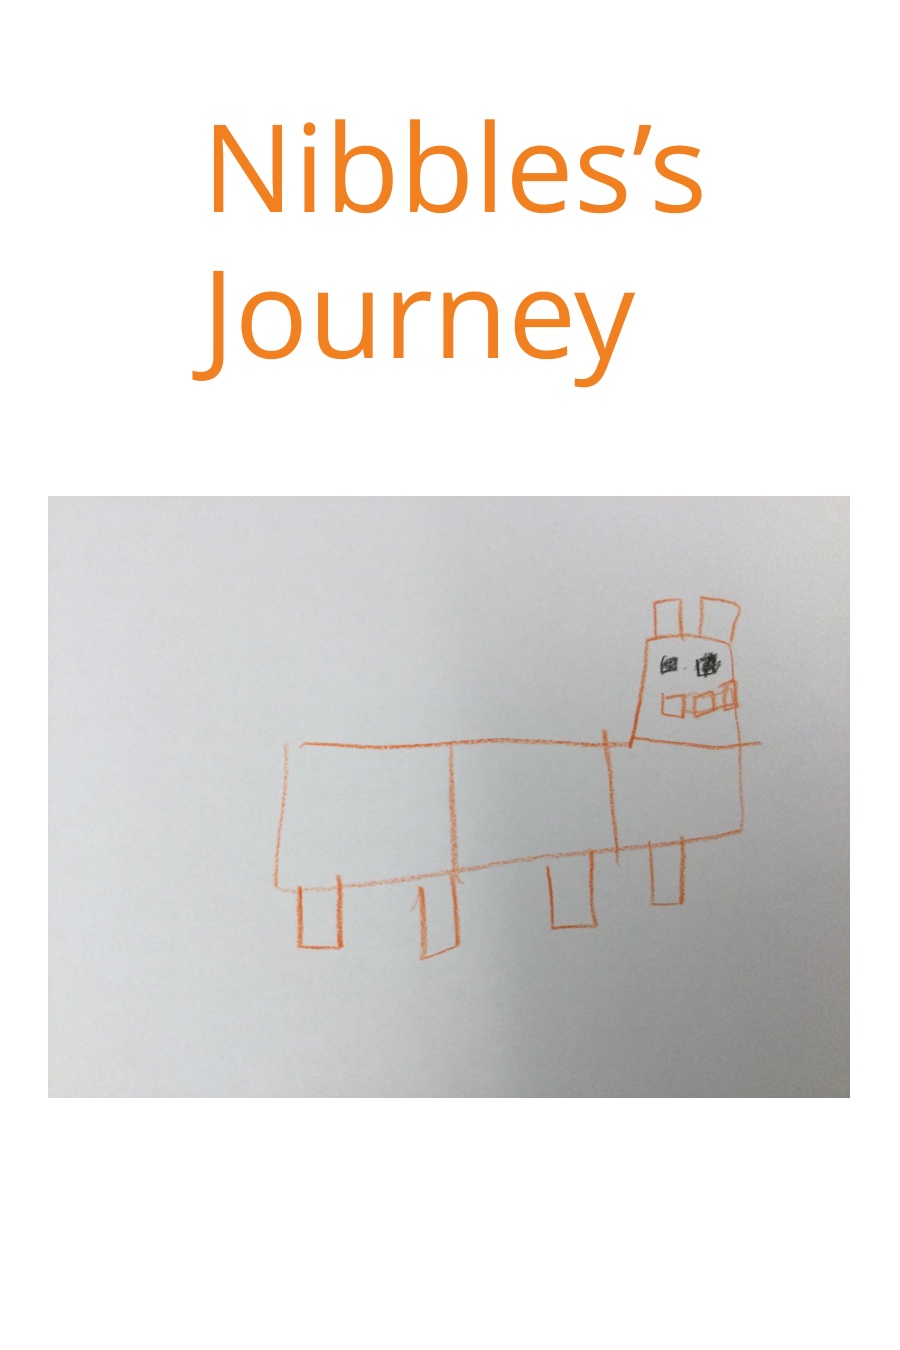 Nibbles’ Journey by August M